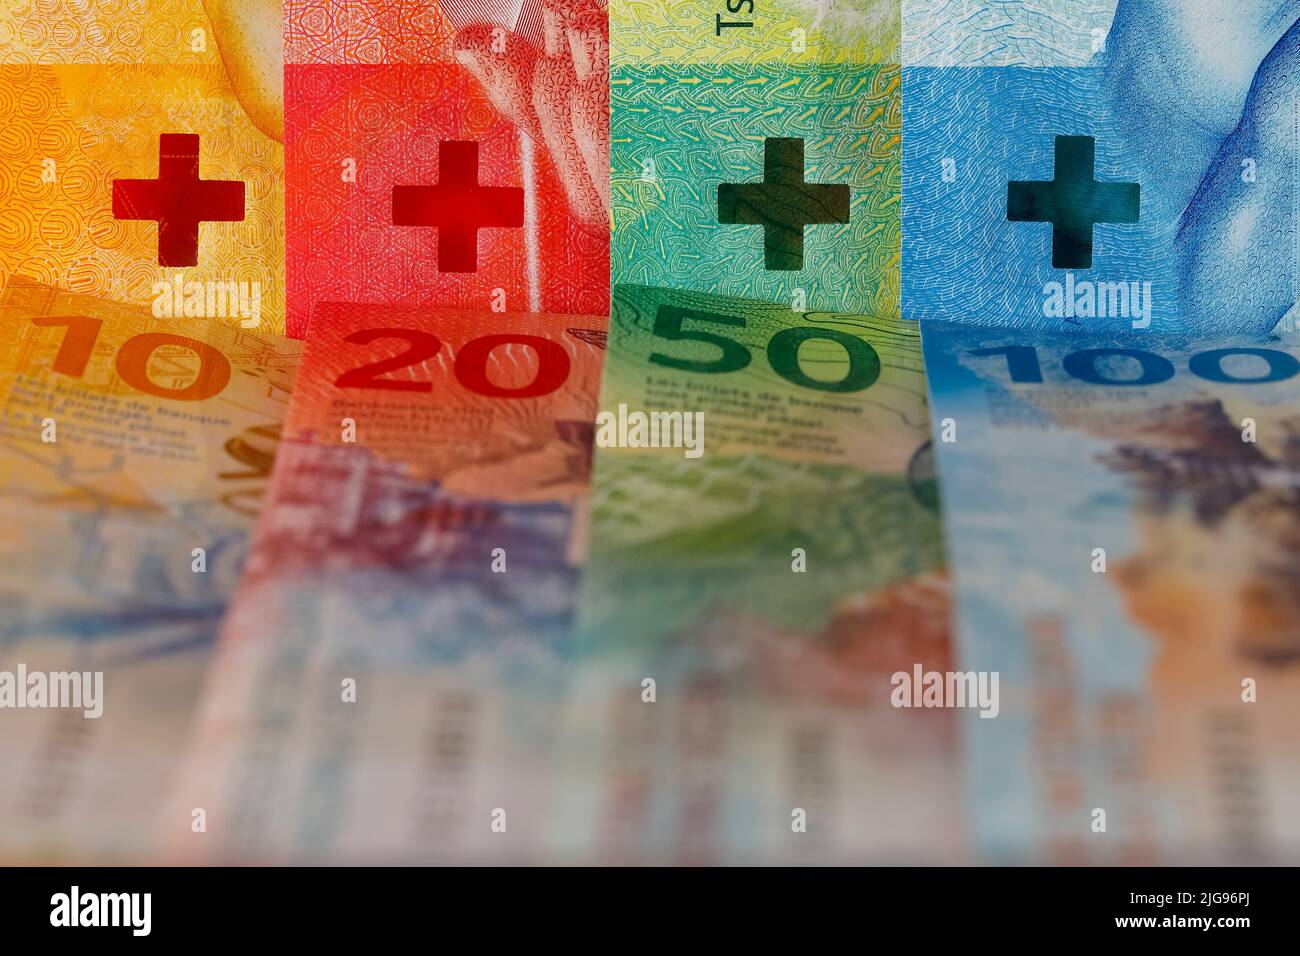 New Swiss banknotes of various denominations. These new banknotes are the eighth series of banknotes which were introduced between 2016 and 2019. Stock Photo